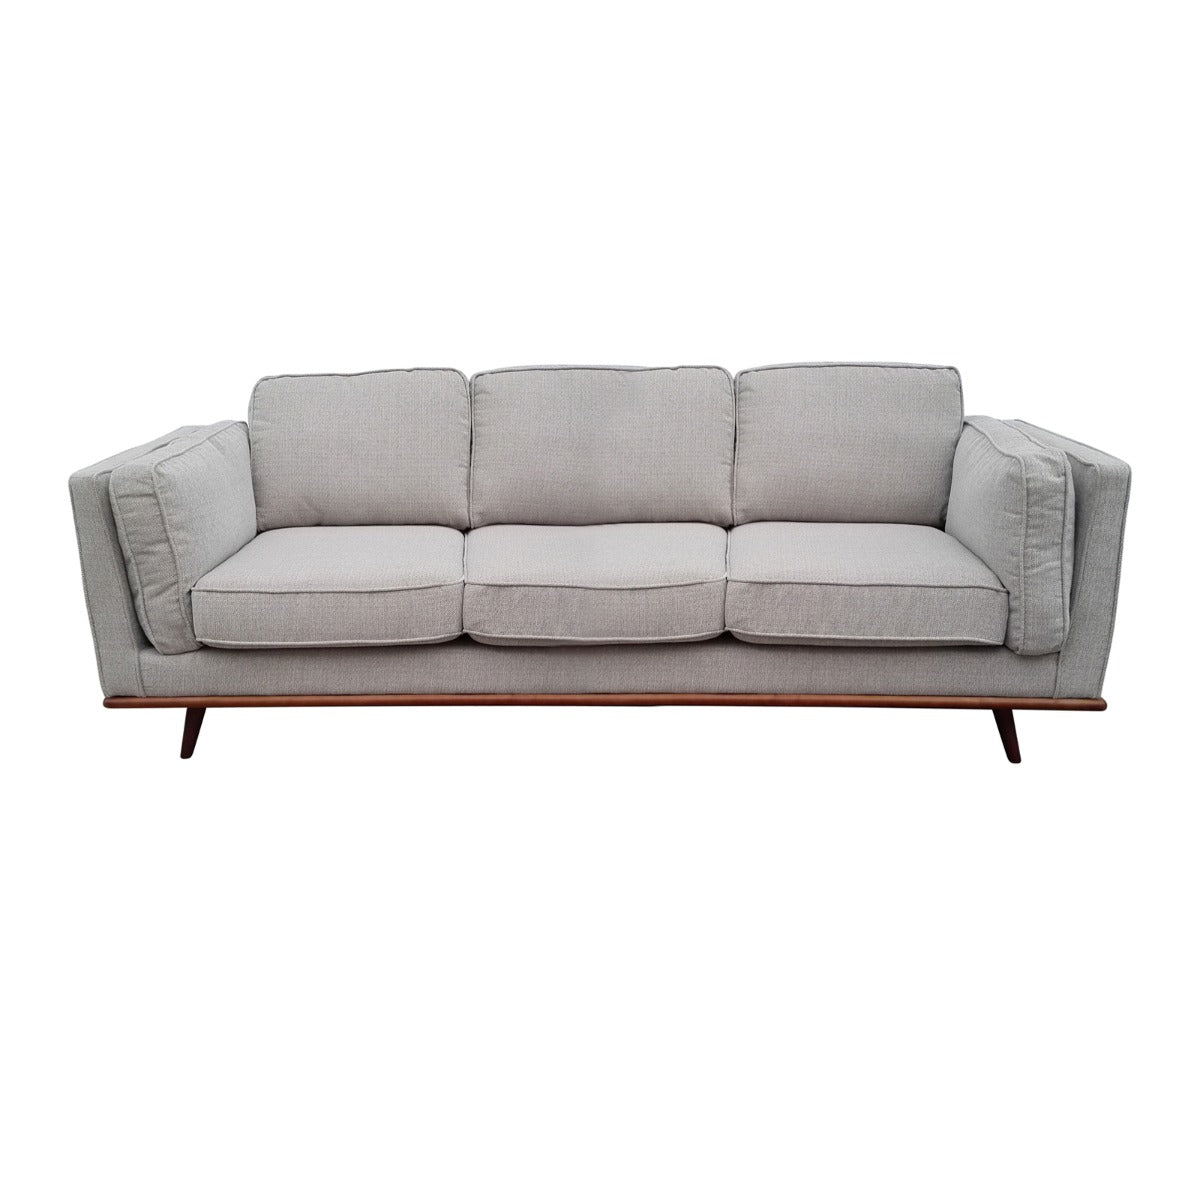 3 Seater Sofa Beige Fabric Modern Lounge Set for Living Room Couch with Wooden Frame - image2